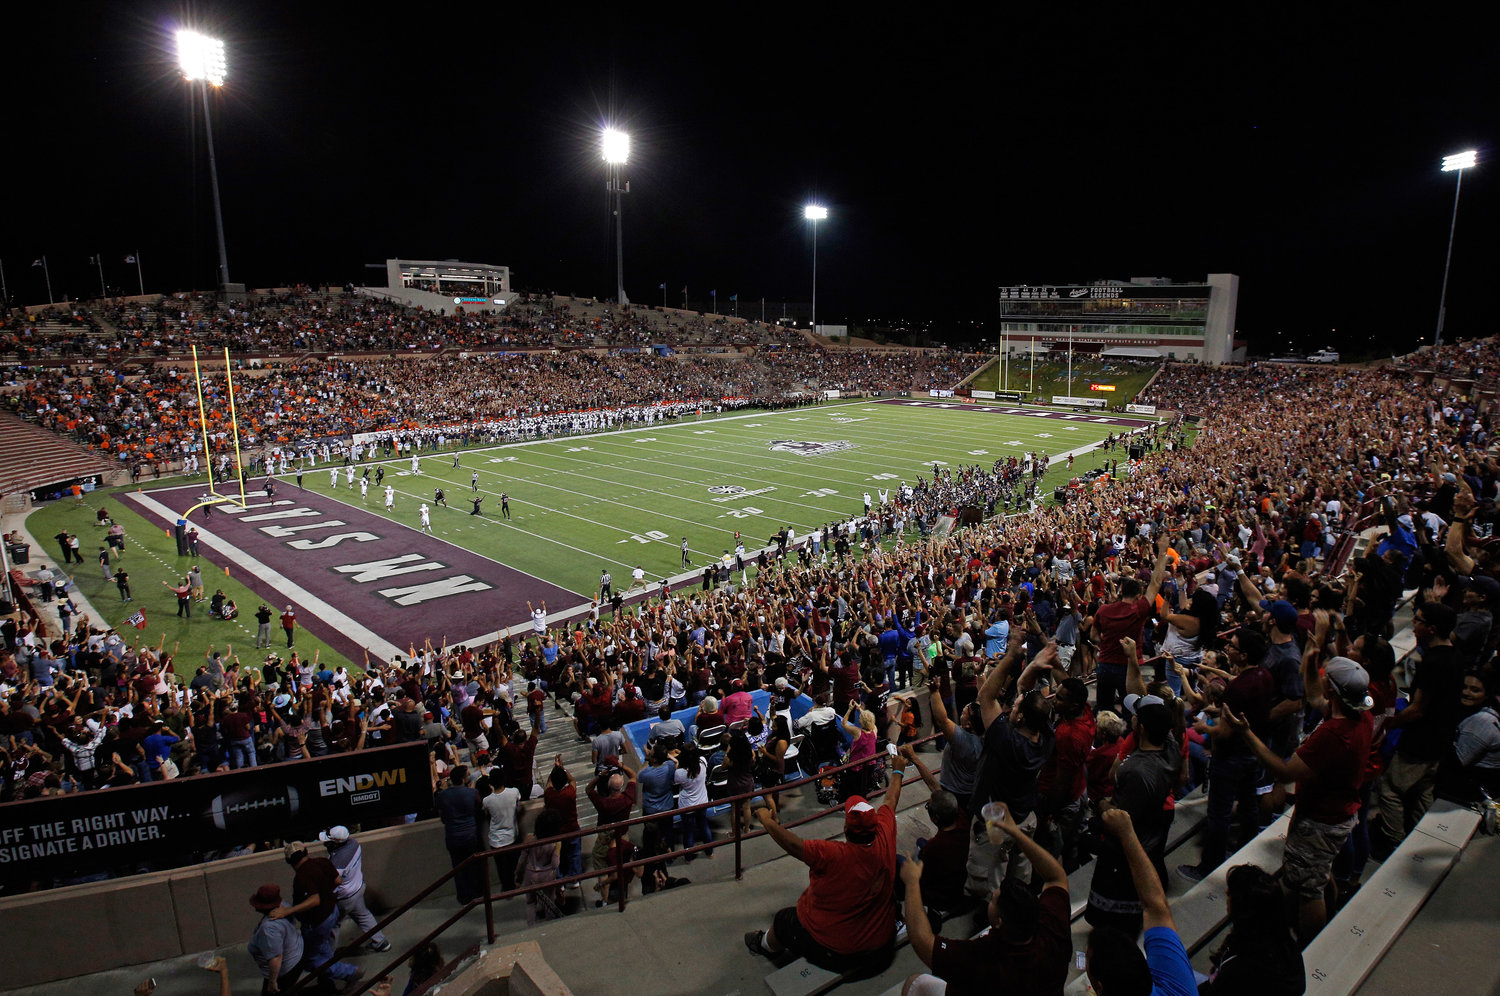 Aggie football kickoff time has been announced for the New Mexico State University home opener Saturday, Aug. 27. The game against Nevada will start at 8 p.m. at Aggie Memorial Stadium. In addition, the game will be televised nationally on ESPN2.